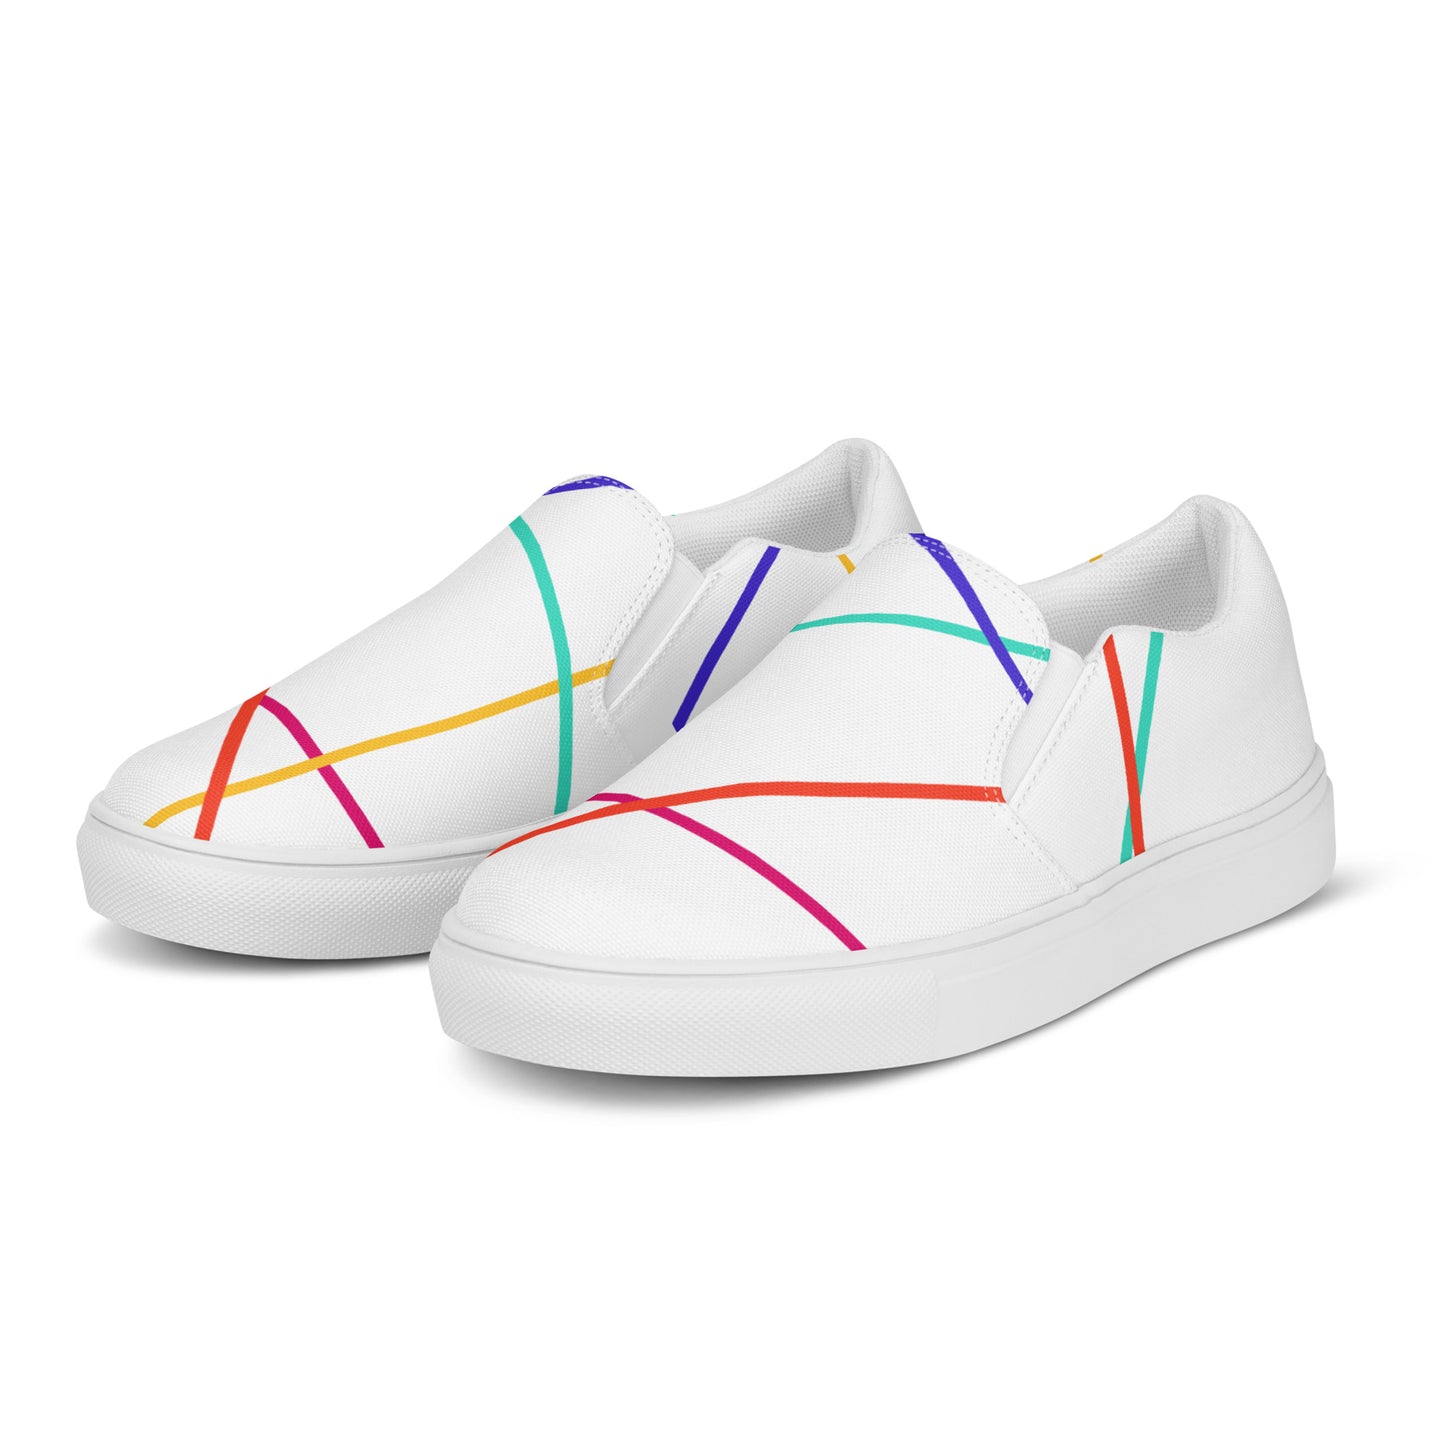 Snooty Fox Art Women’s Slip-on Canvas Shoes - Colored Lines